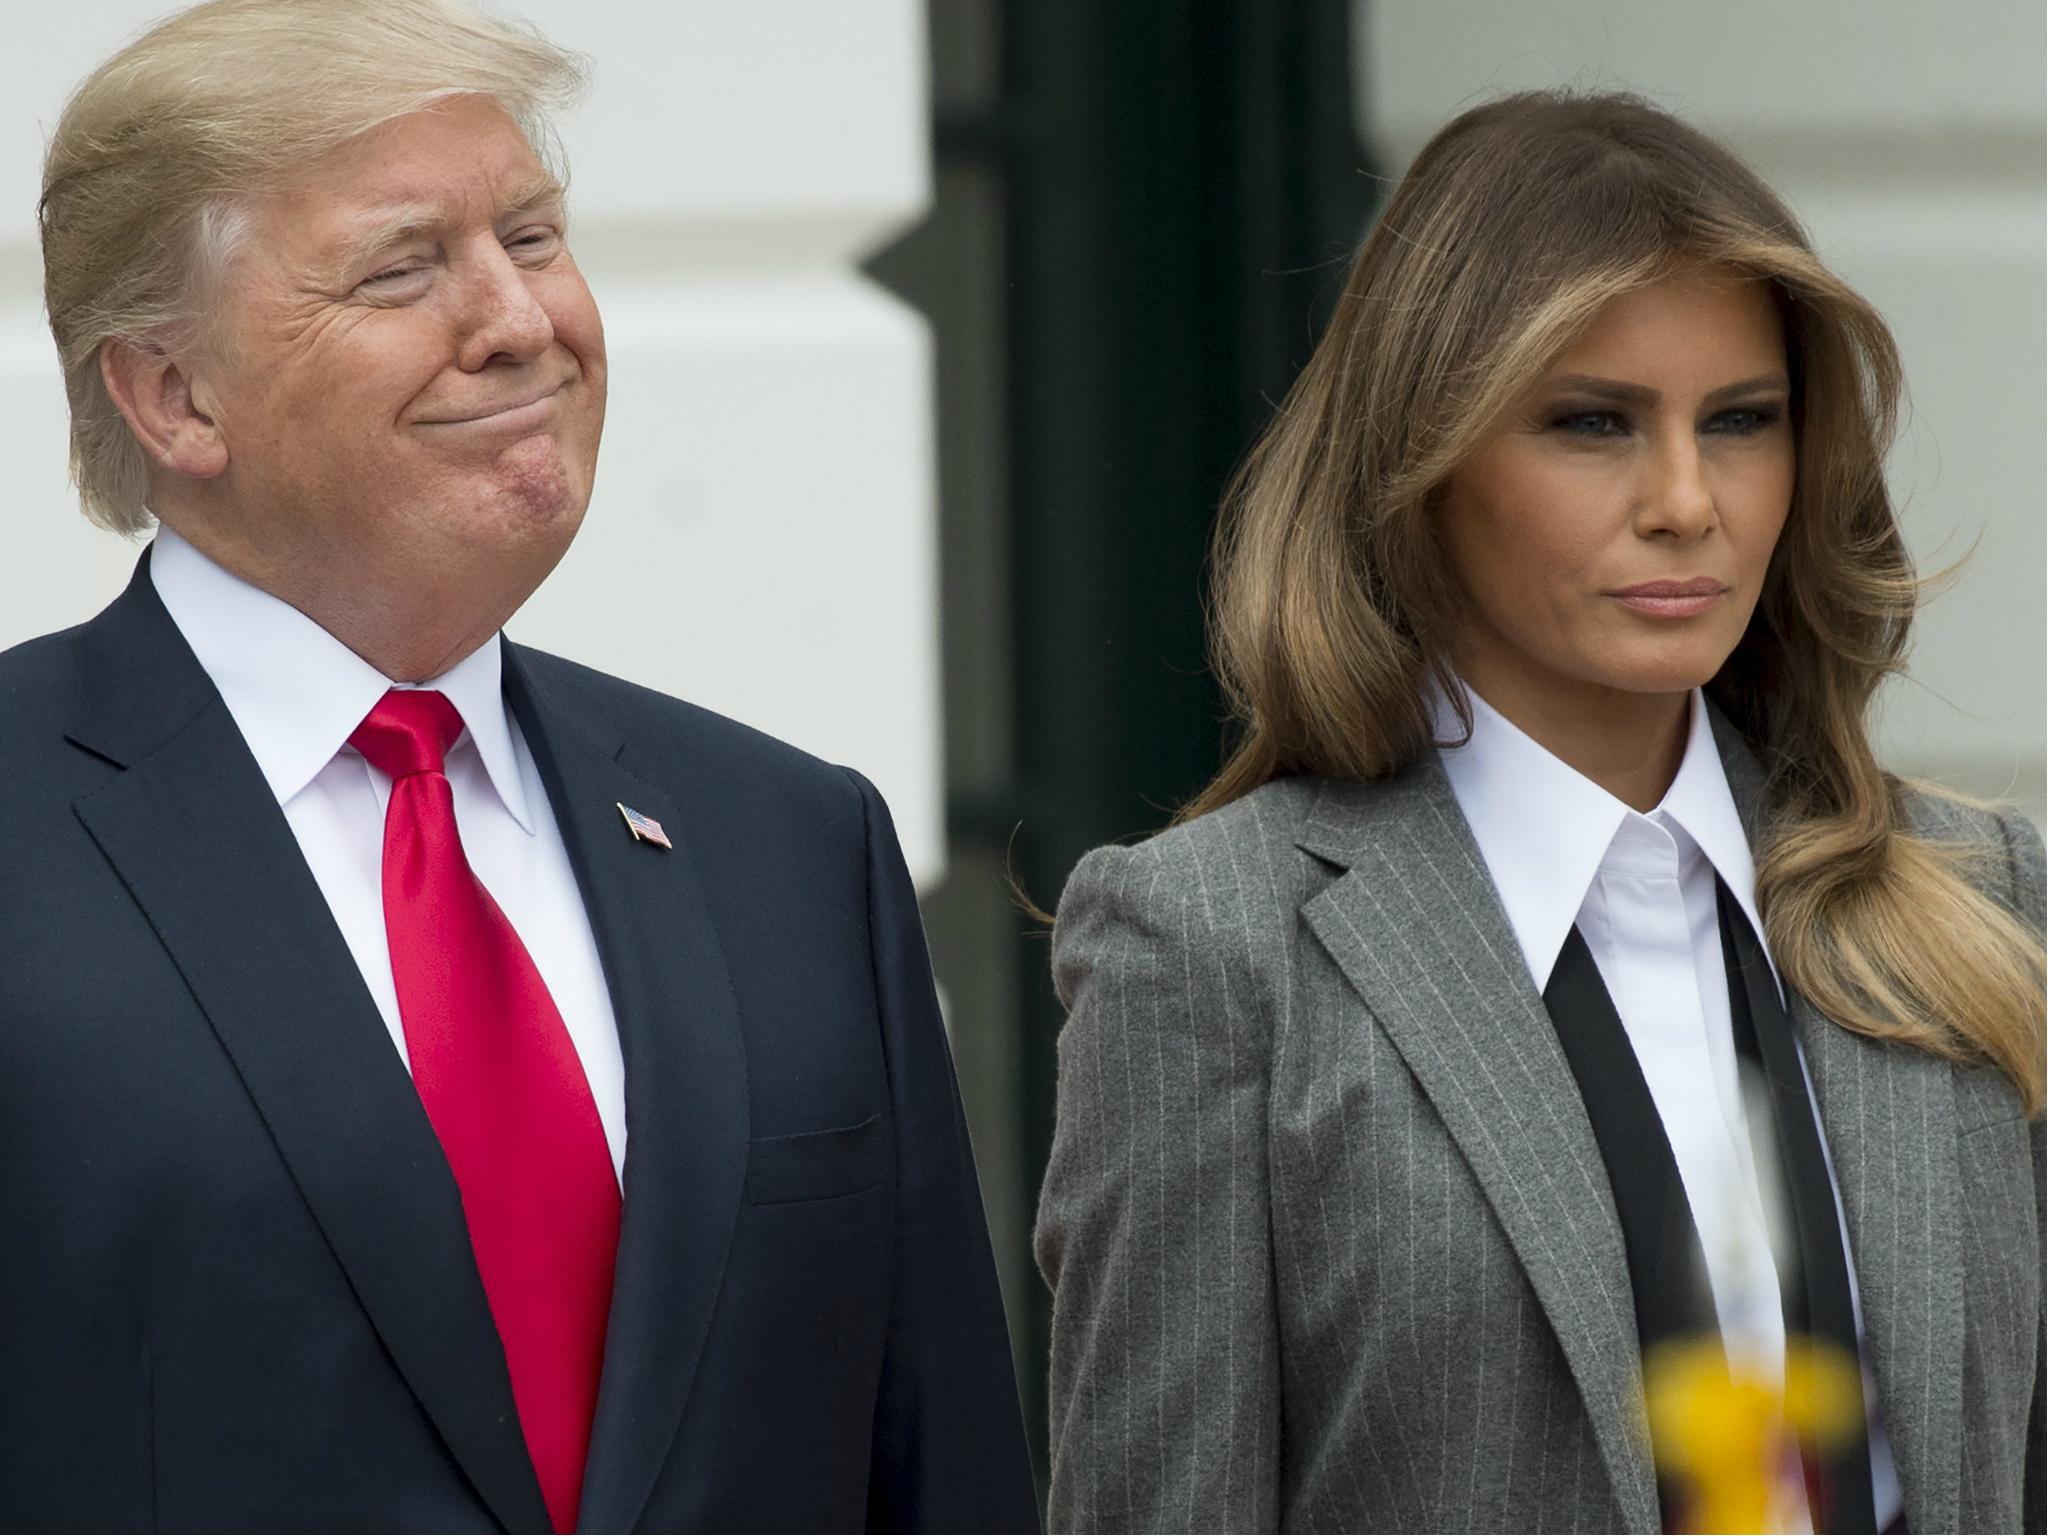 Melania Trump has made cyberbullying one of her main causes as First Lady while US President Donald Trump continues to berate people via Twitter.